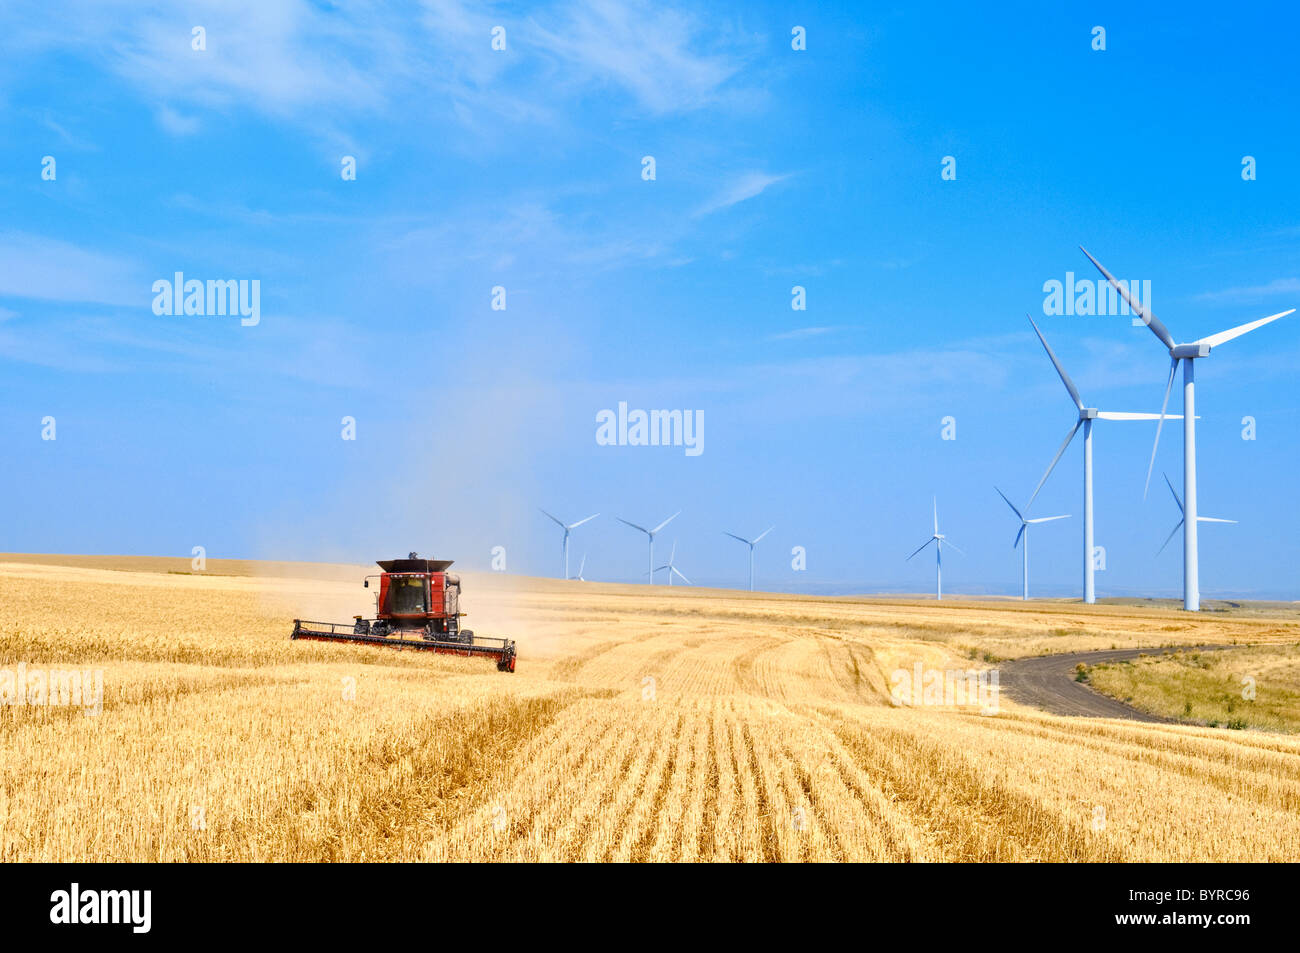 A Case IH combine harvests wheat with a row of large wind turbines along the perimeter of the field / Washington, USA. Stock Photo